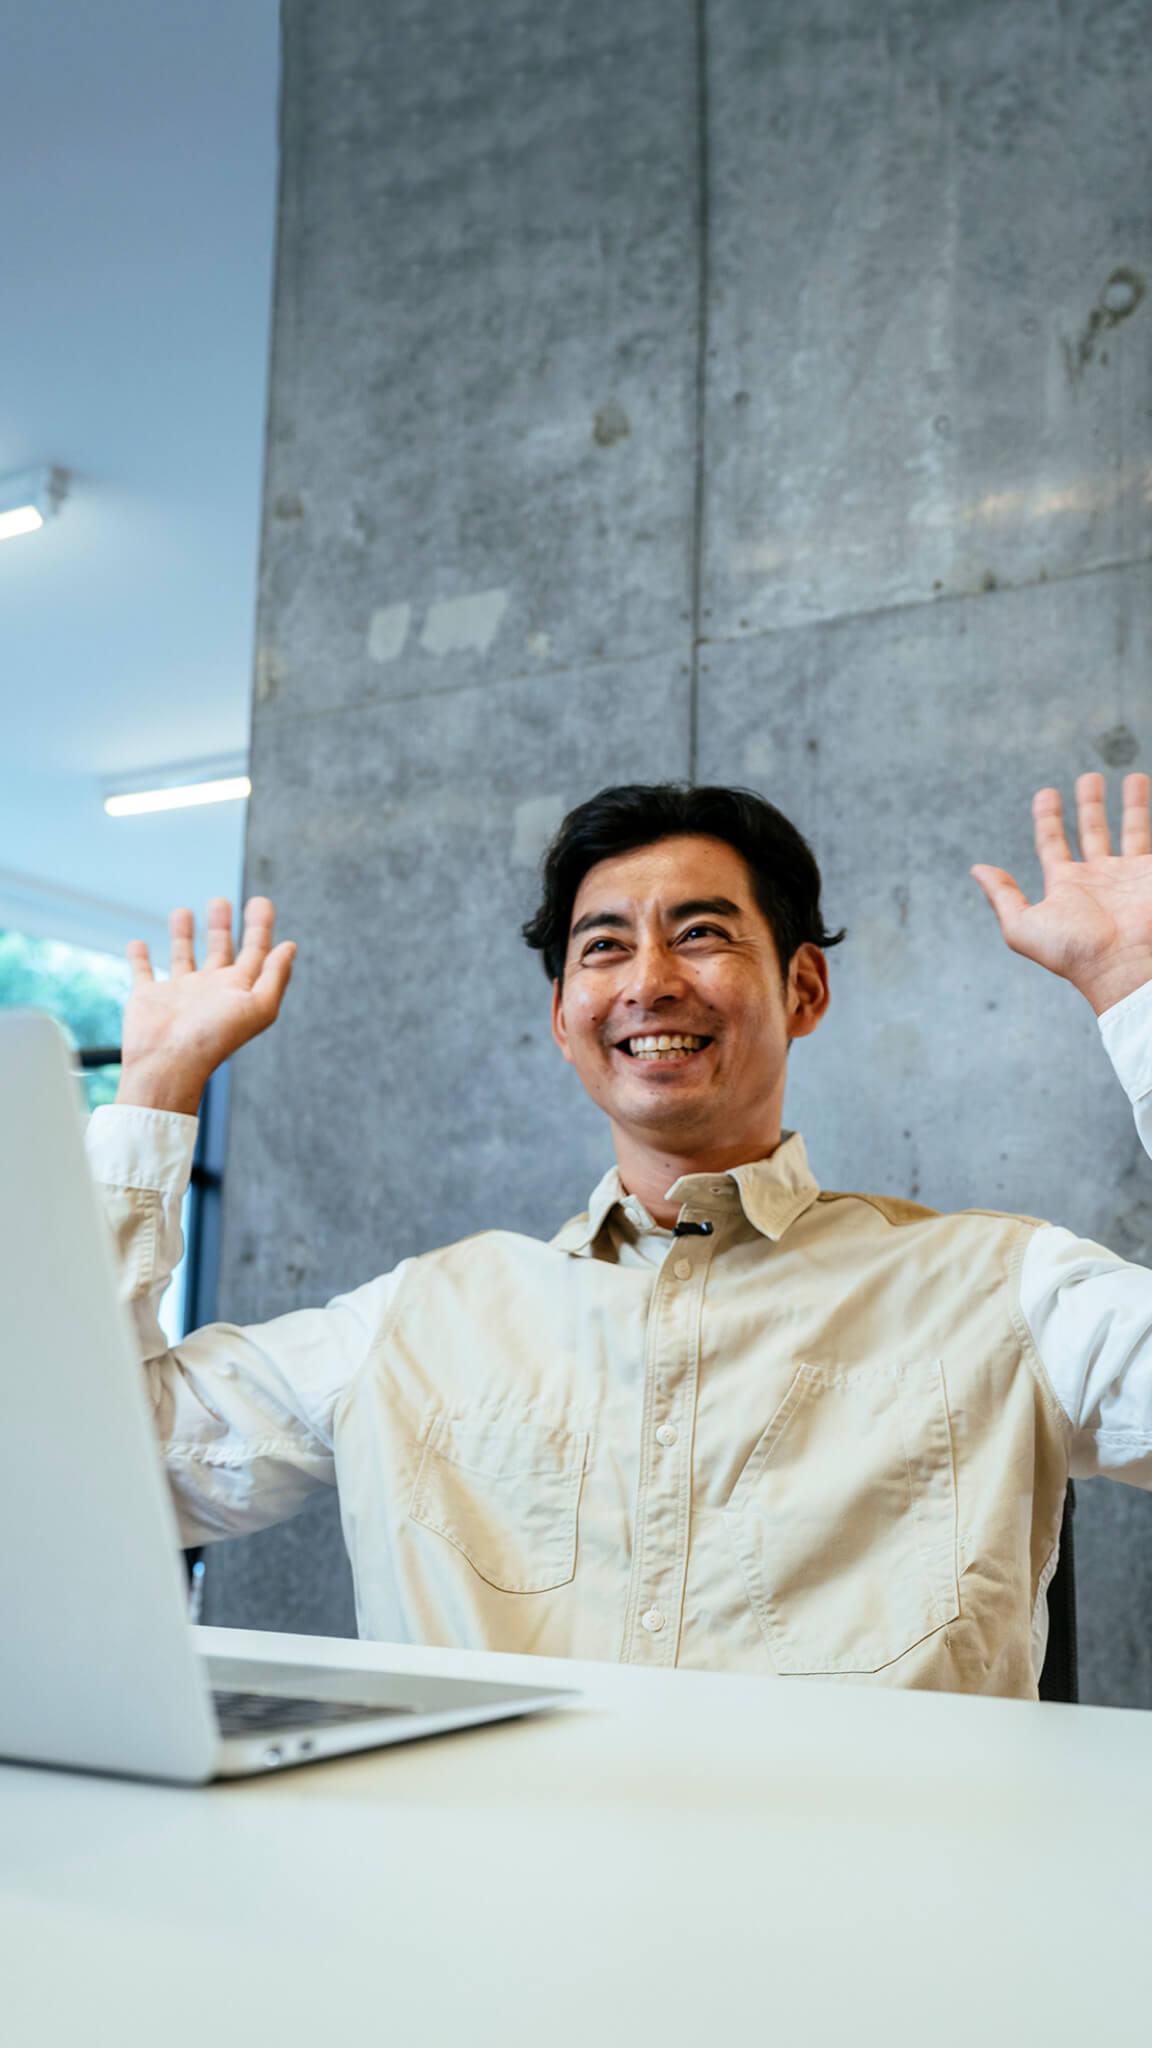 smiling man holding up hands infront of laptop